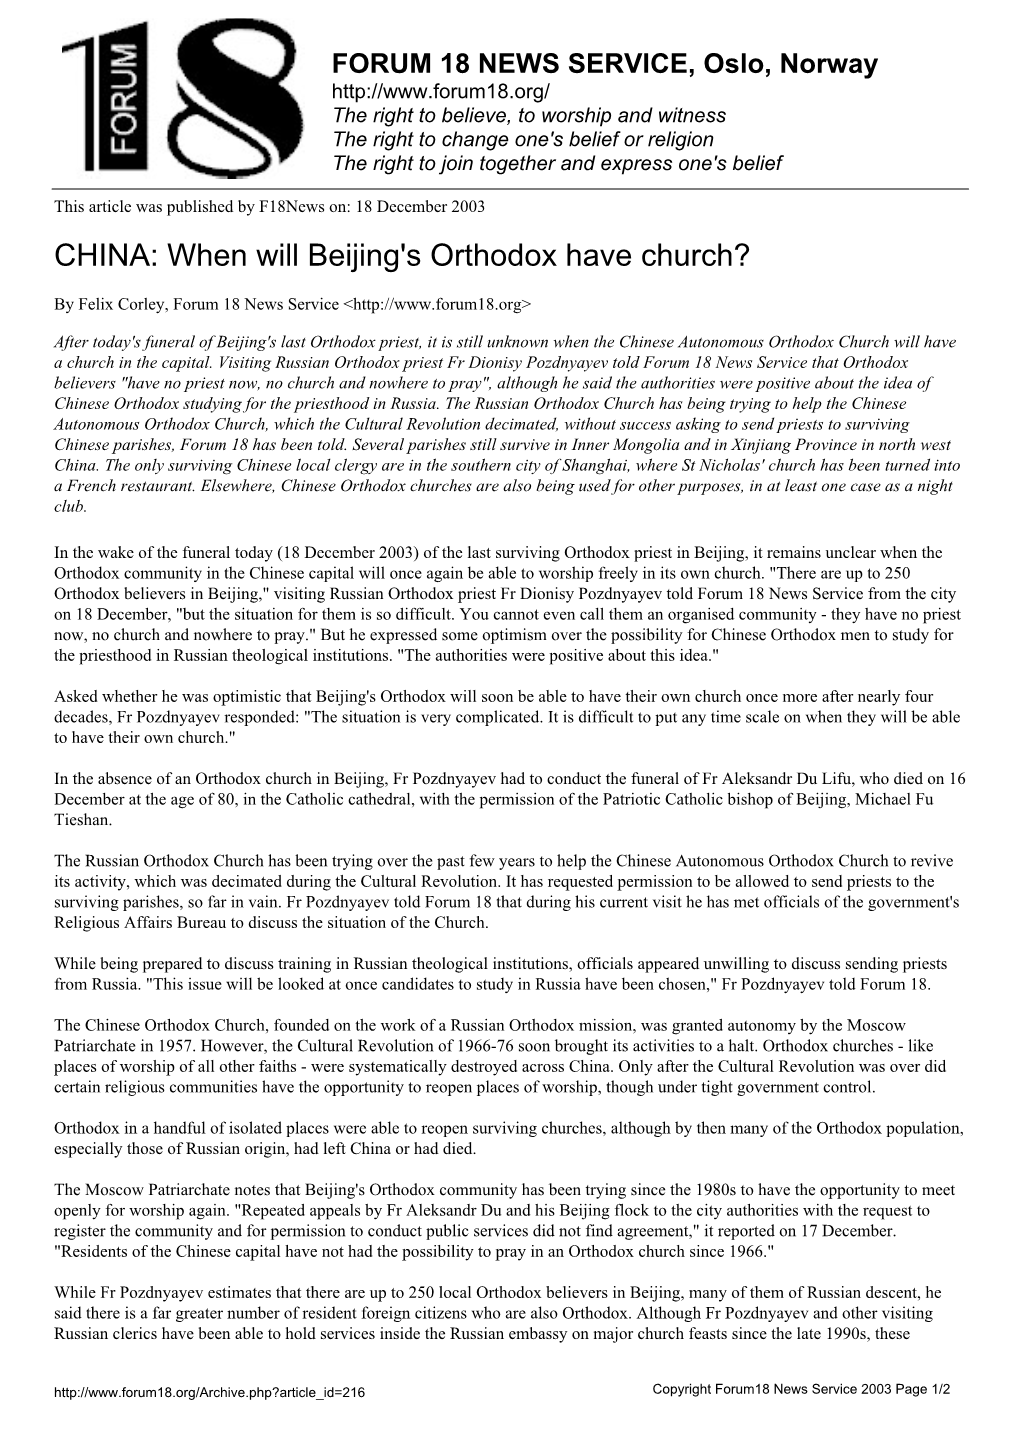 When Will Beijing's Orthodox Have Church?